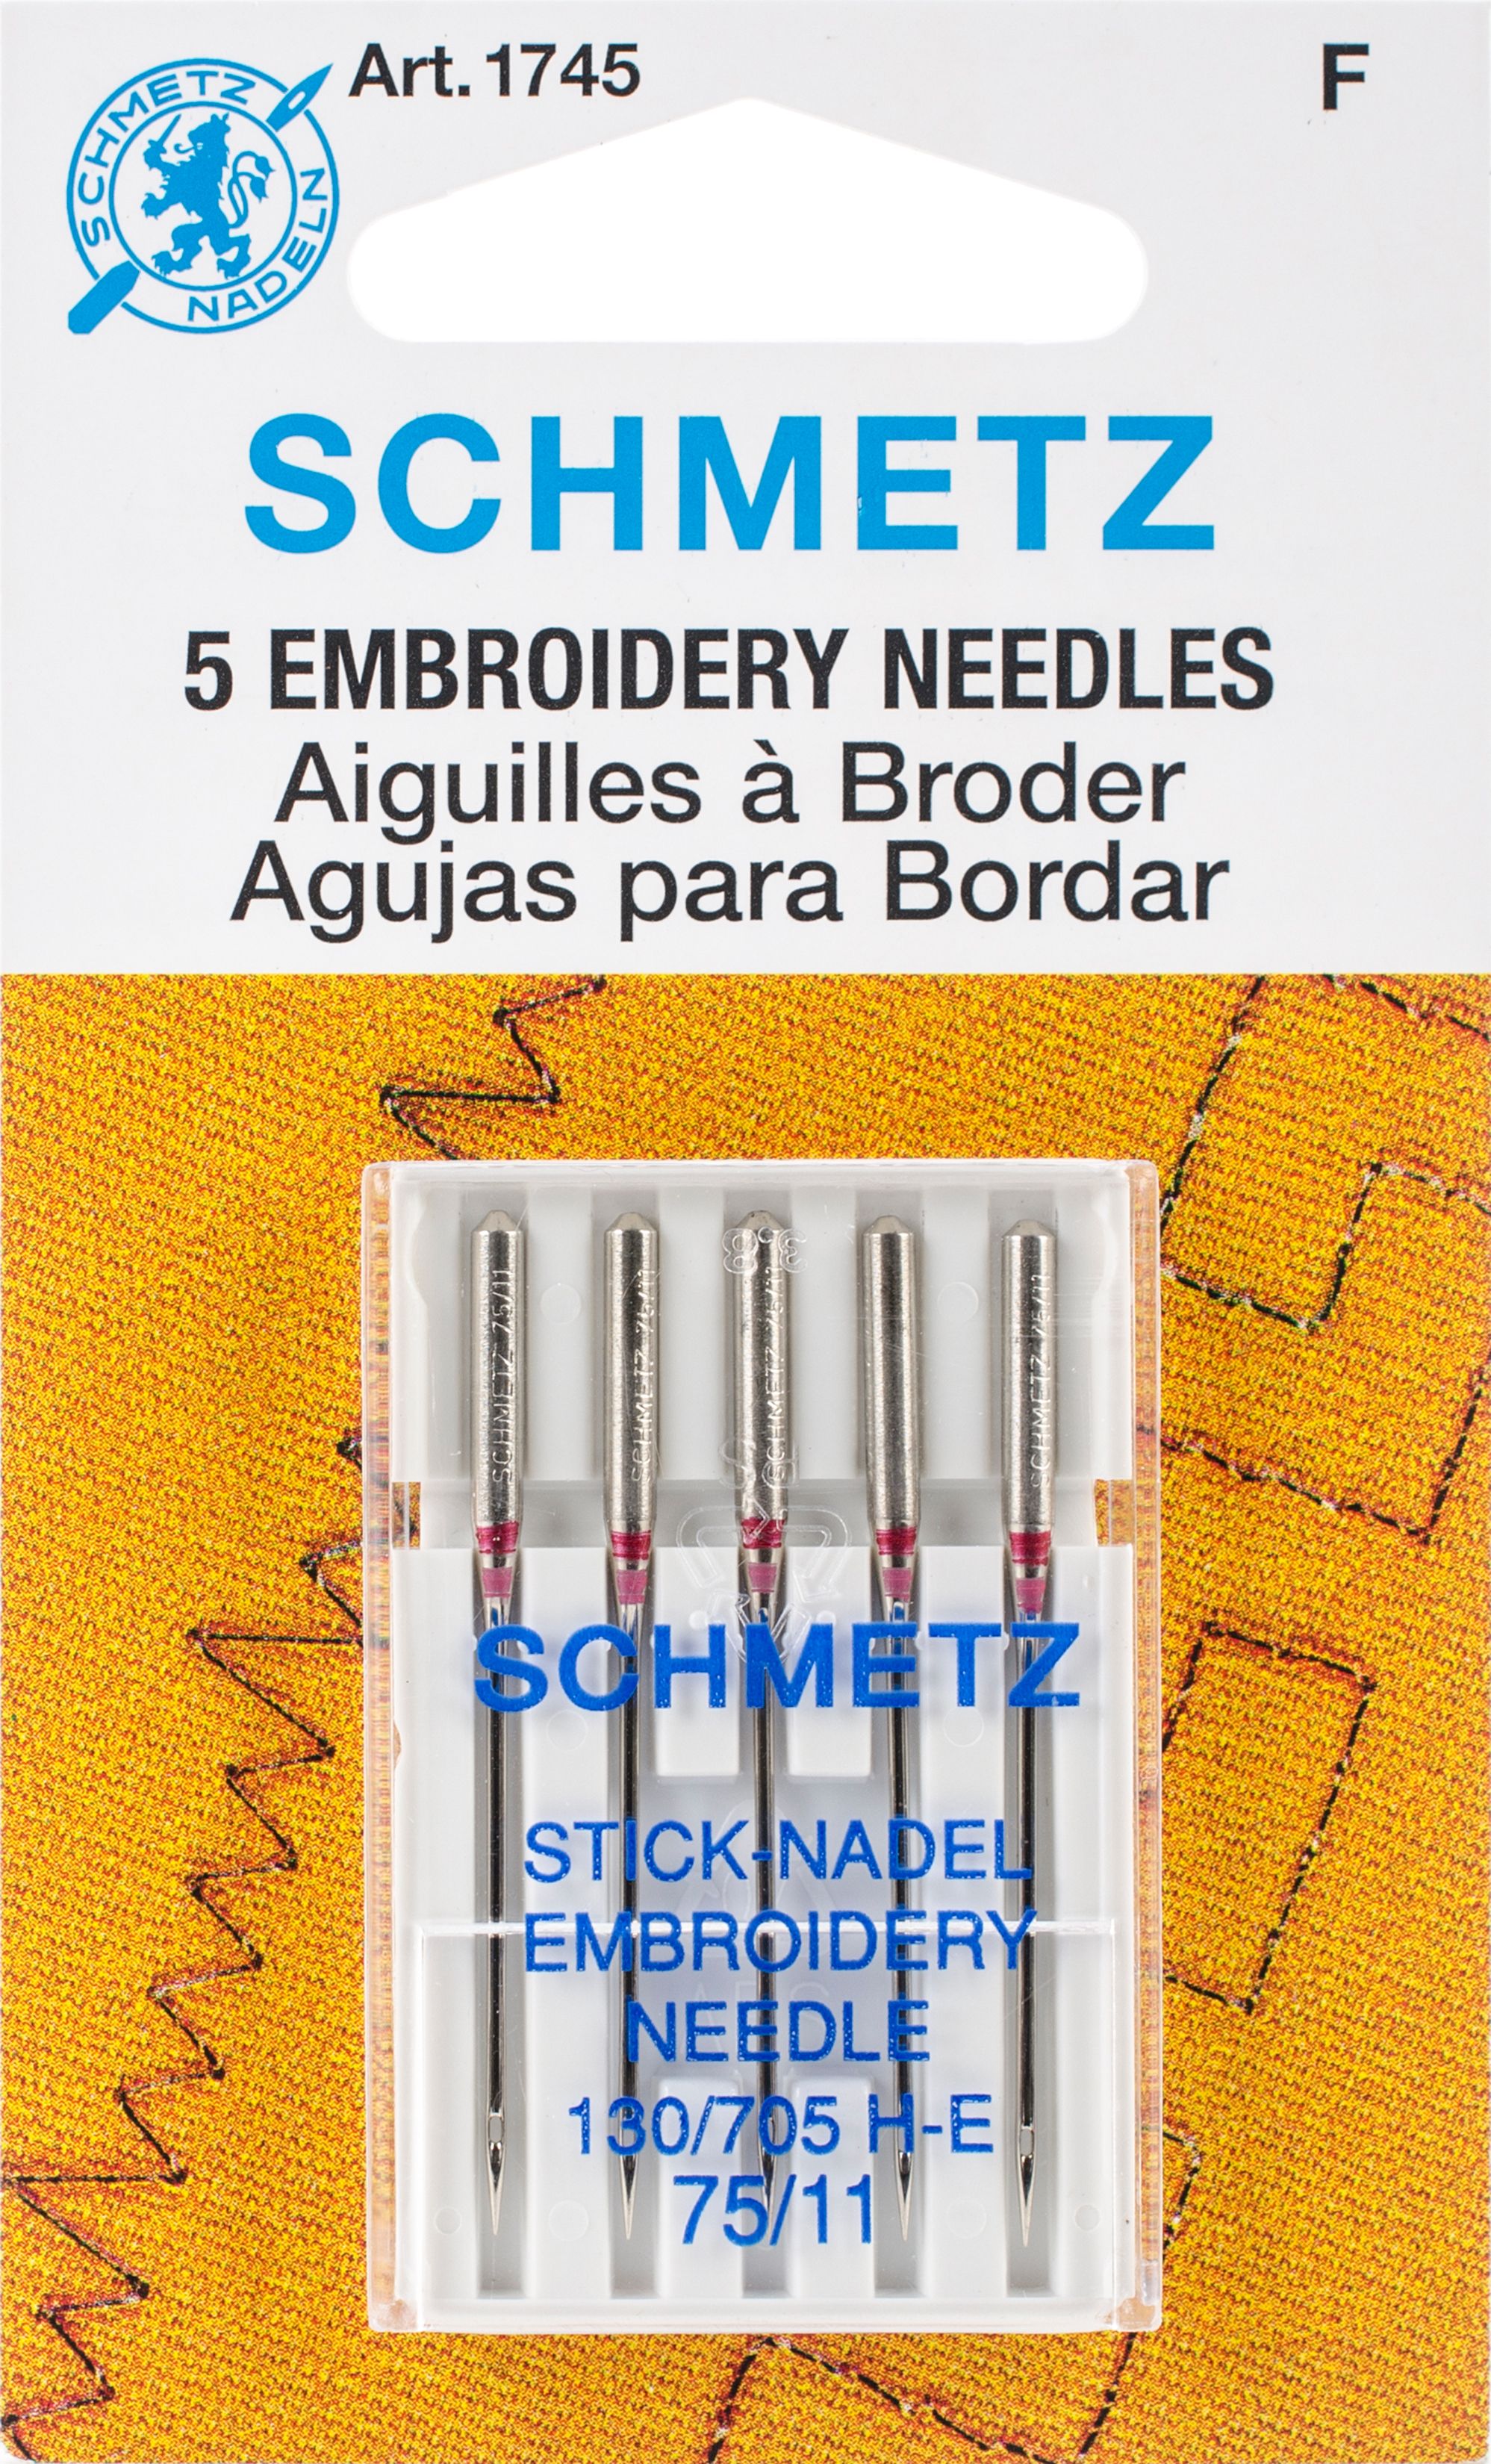 Schmetz Size 75/11 Machine Embroidery Needles, 5 Count - image 1 of 2